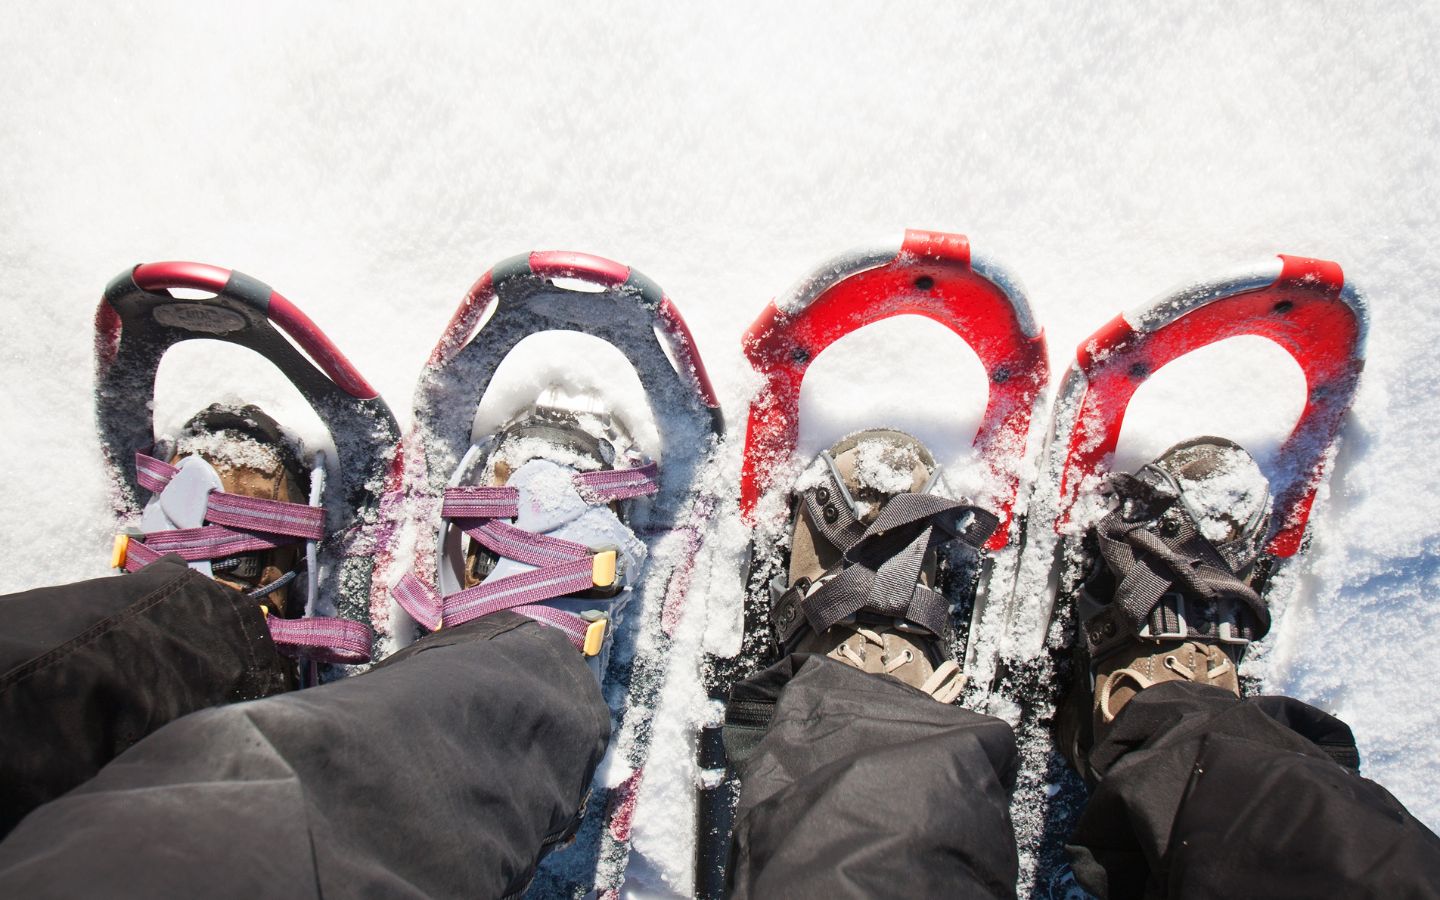 Two pairs of snowshoes, red and blue